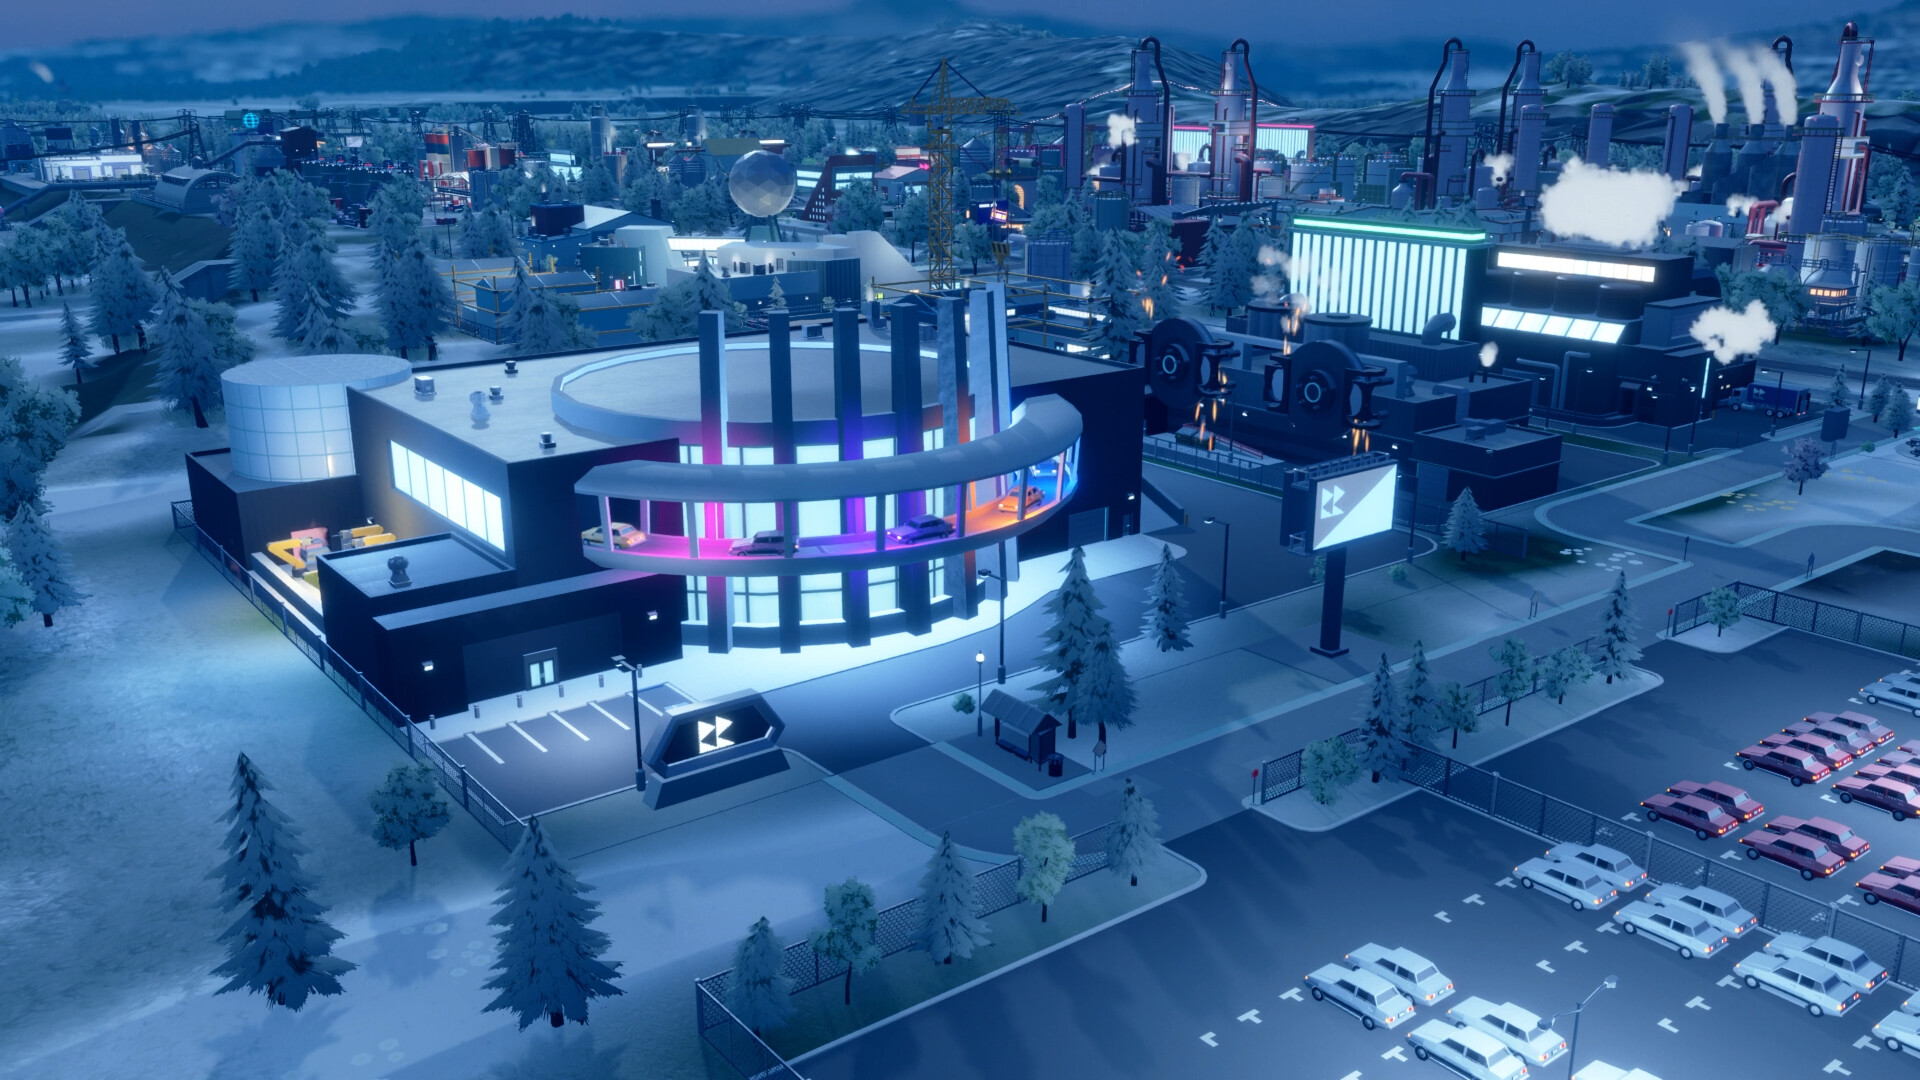 Rse of Industry 2 Steam strategy game: A small town from Steam strategy game Rise of Industry 2